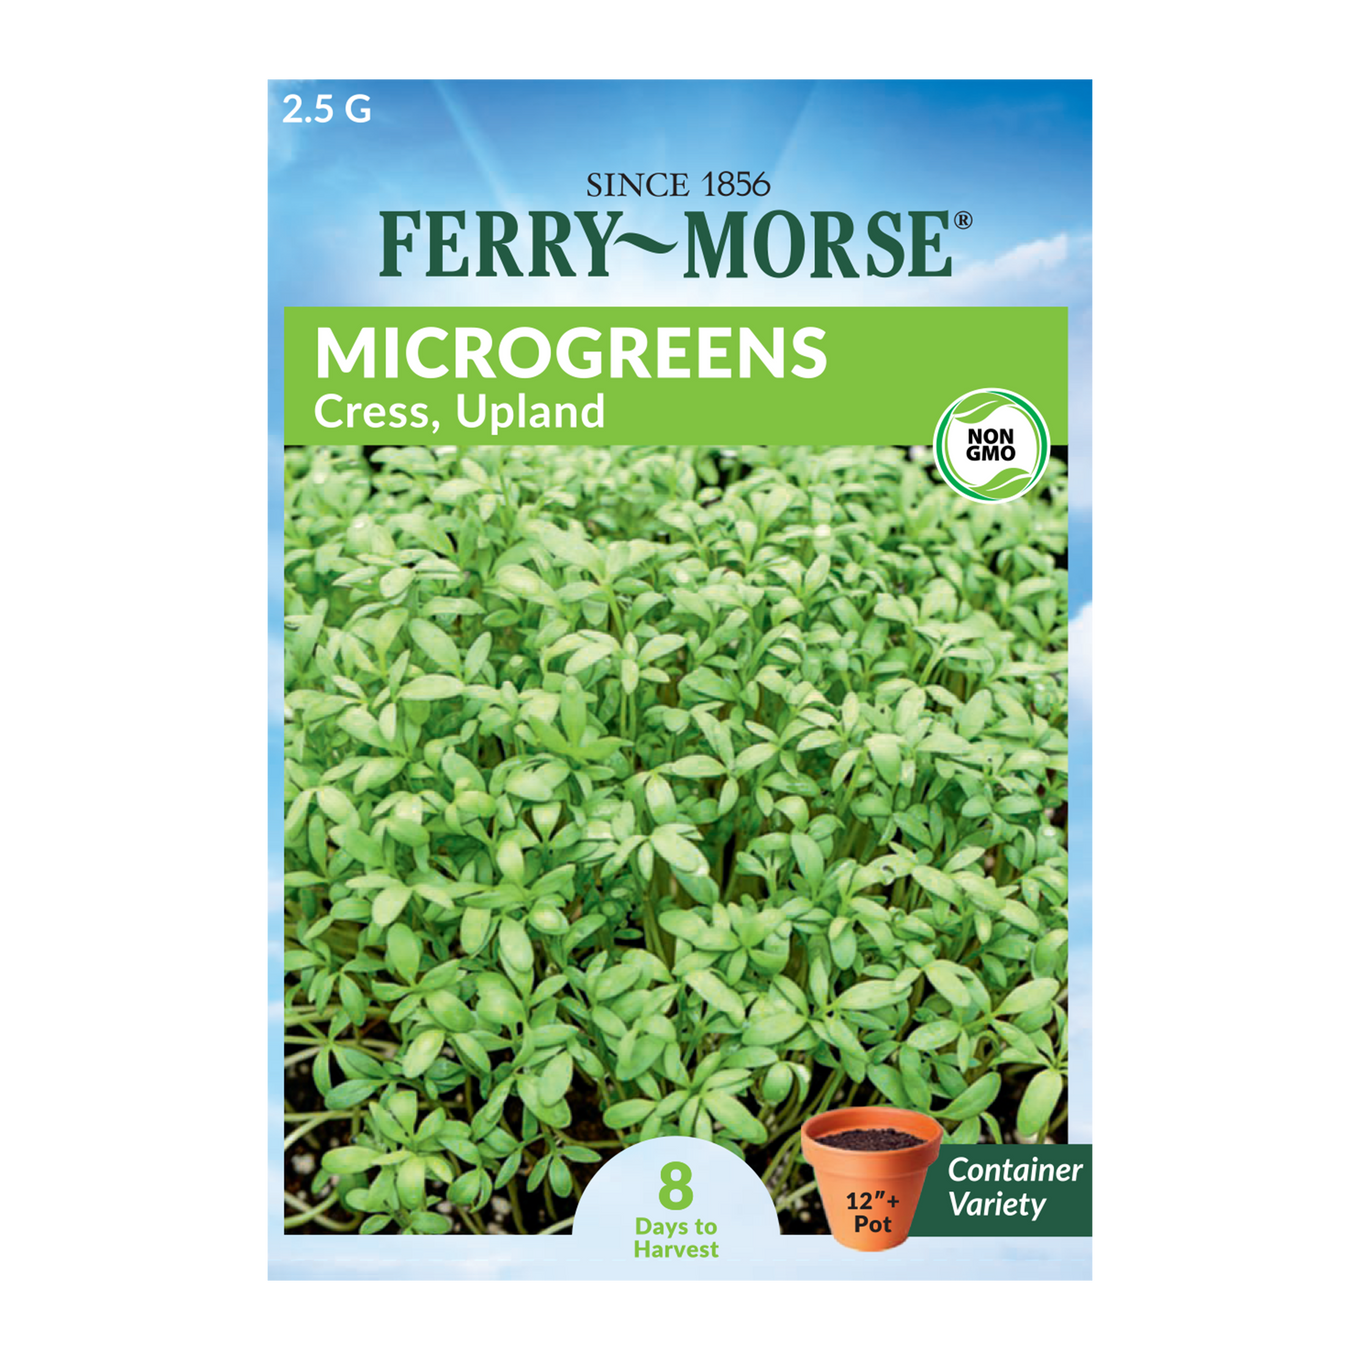 Upland Cress Microgreens Seeds packet front from Ferry Morse_8 Days to Harvest